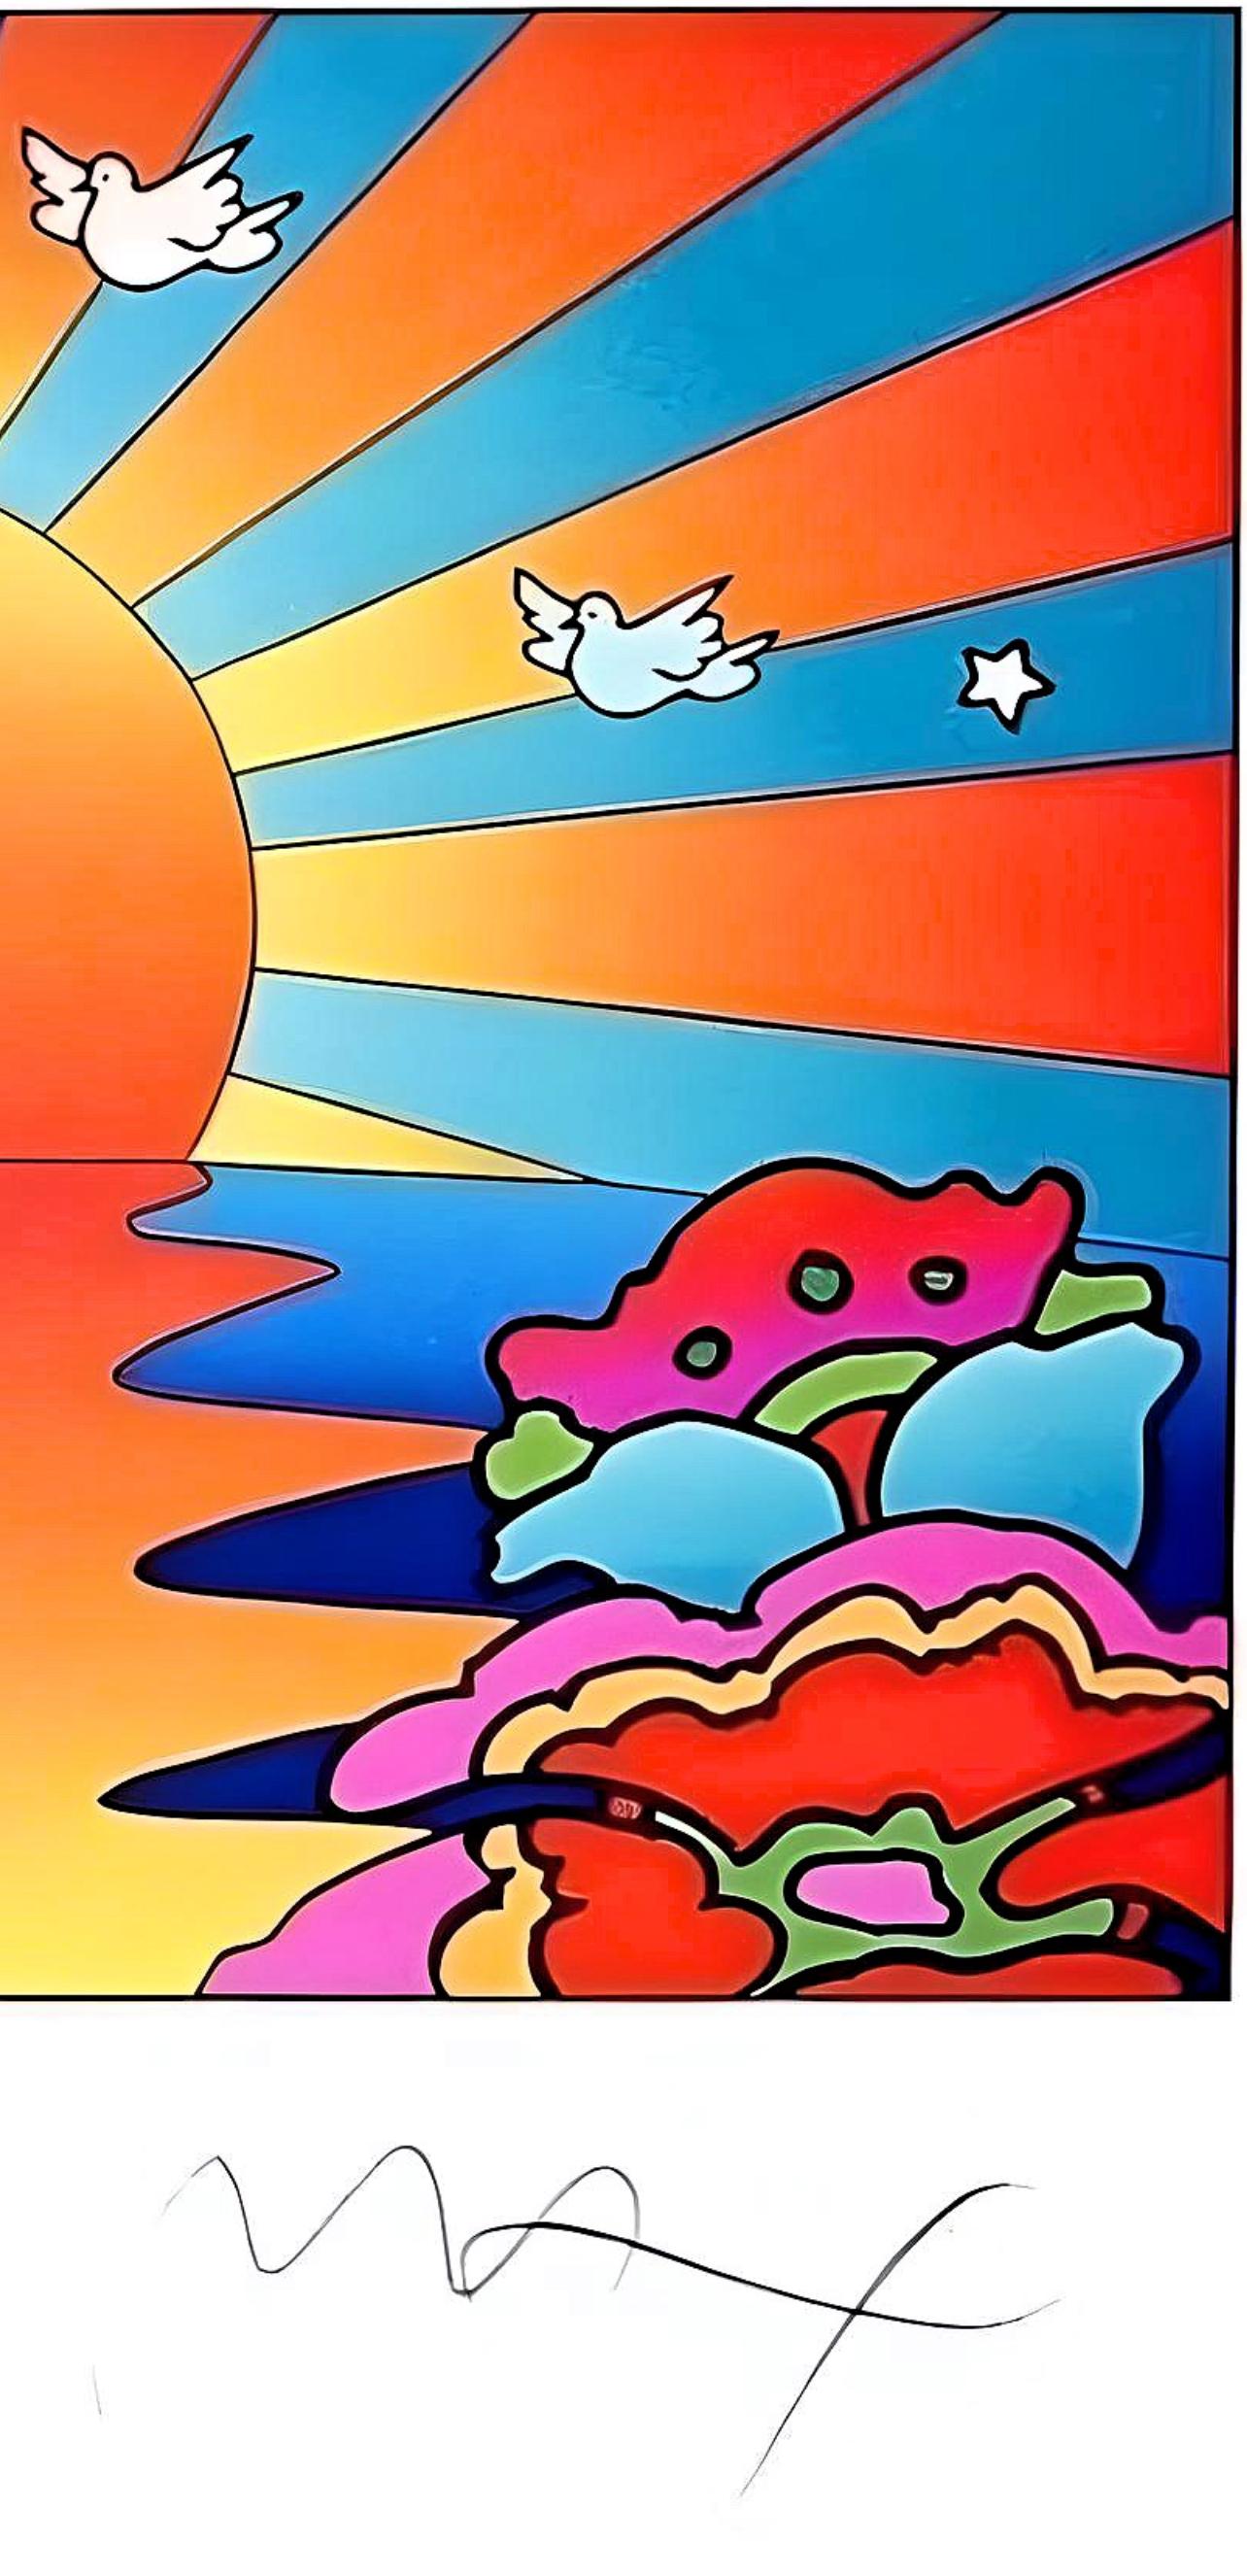 protect our Children Ver. II, Peter Max im Angebot 5